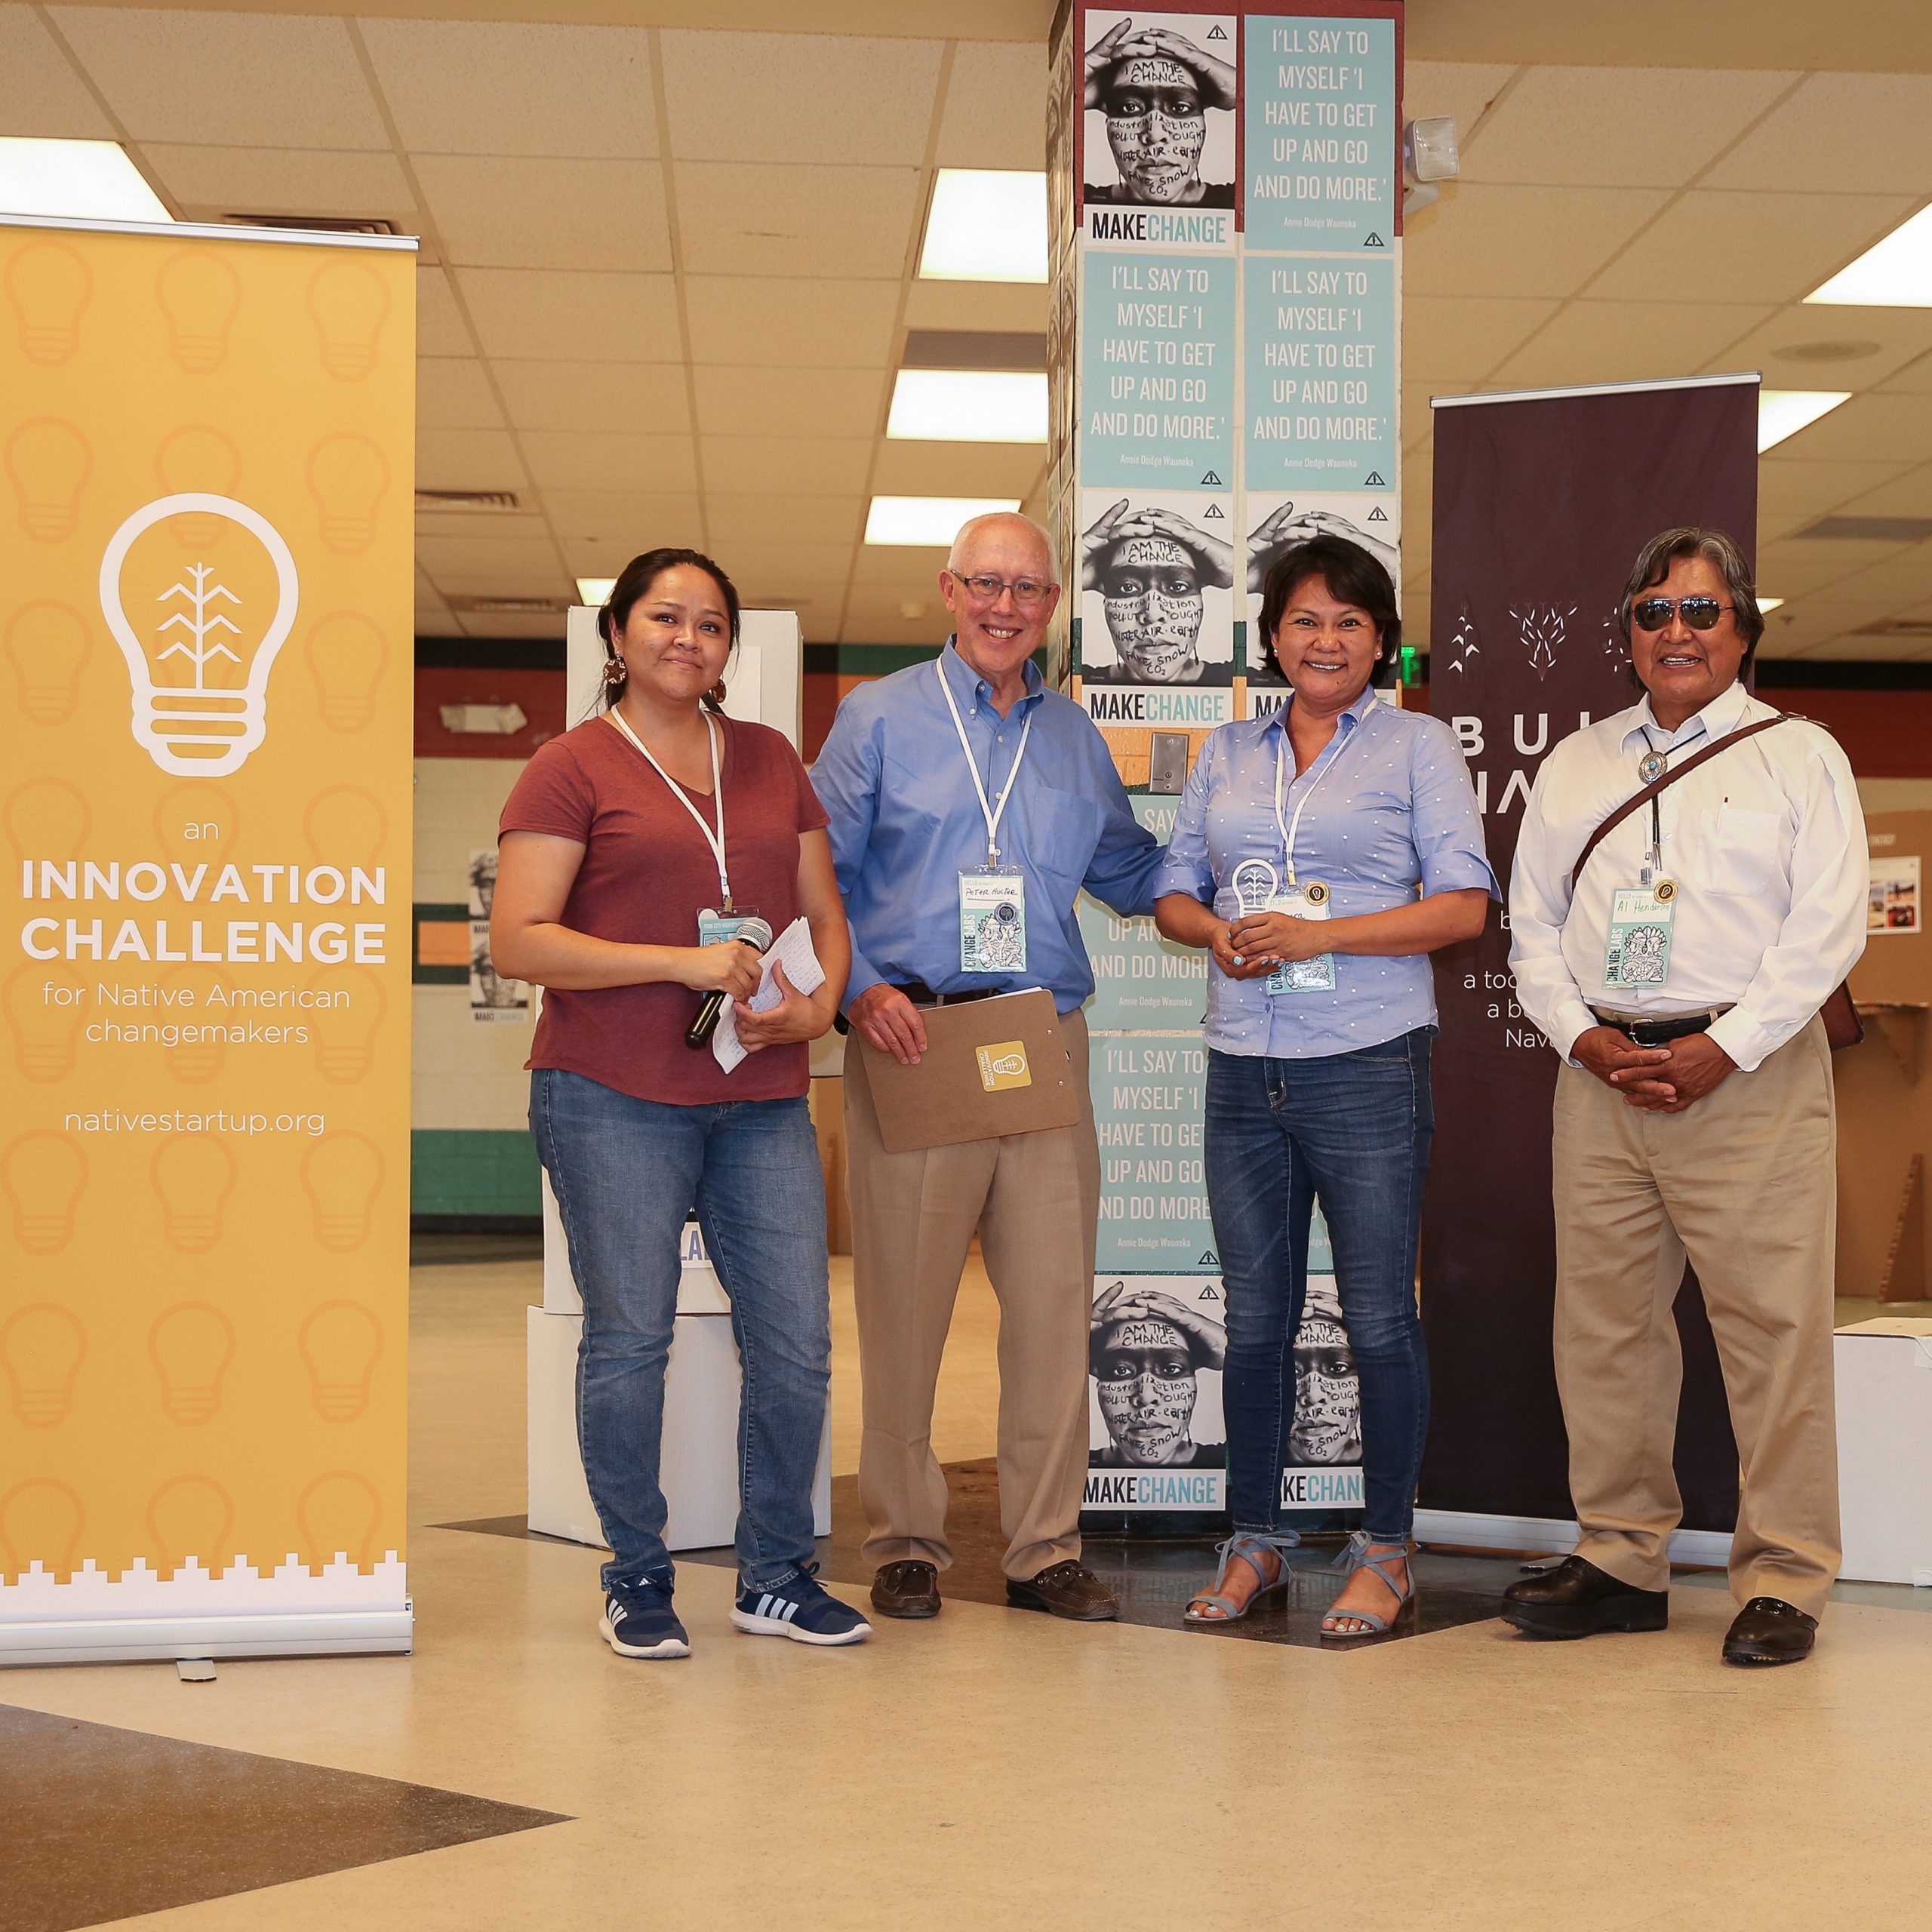 Congratulations to the Winners of the 2017 Innovation Challenge